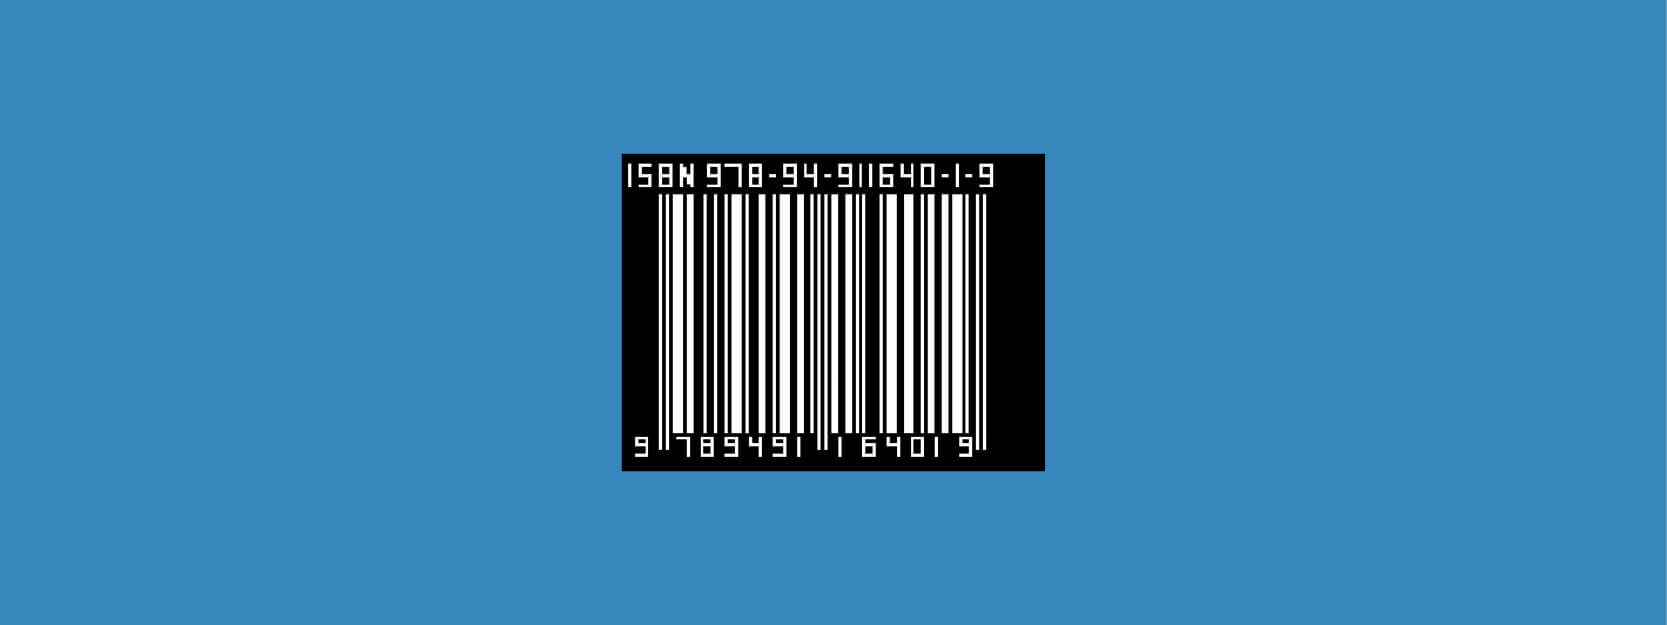 Barcode fout - zwart-wit inverted